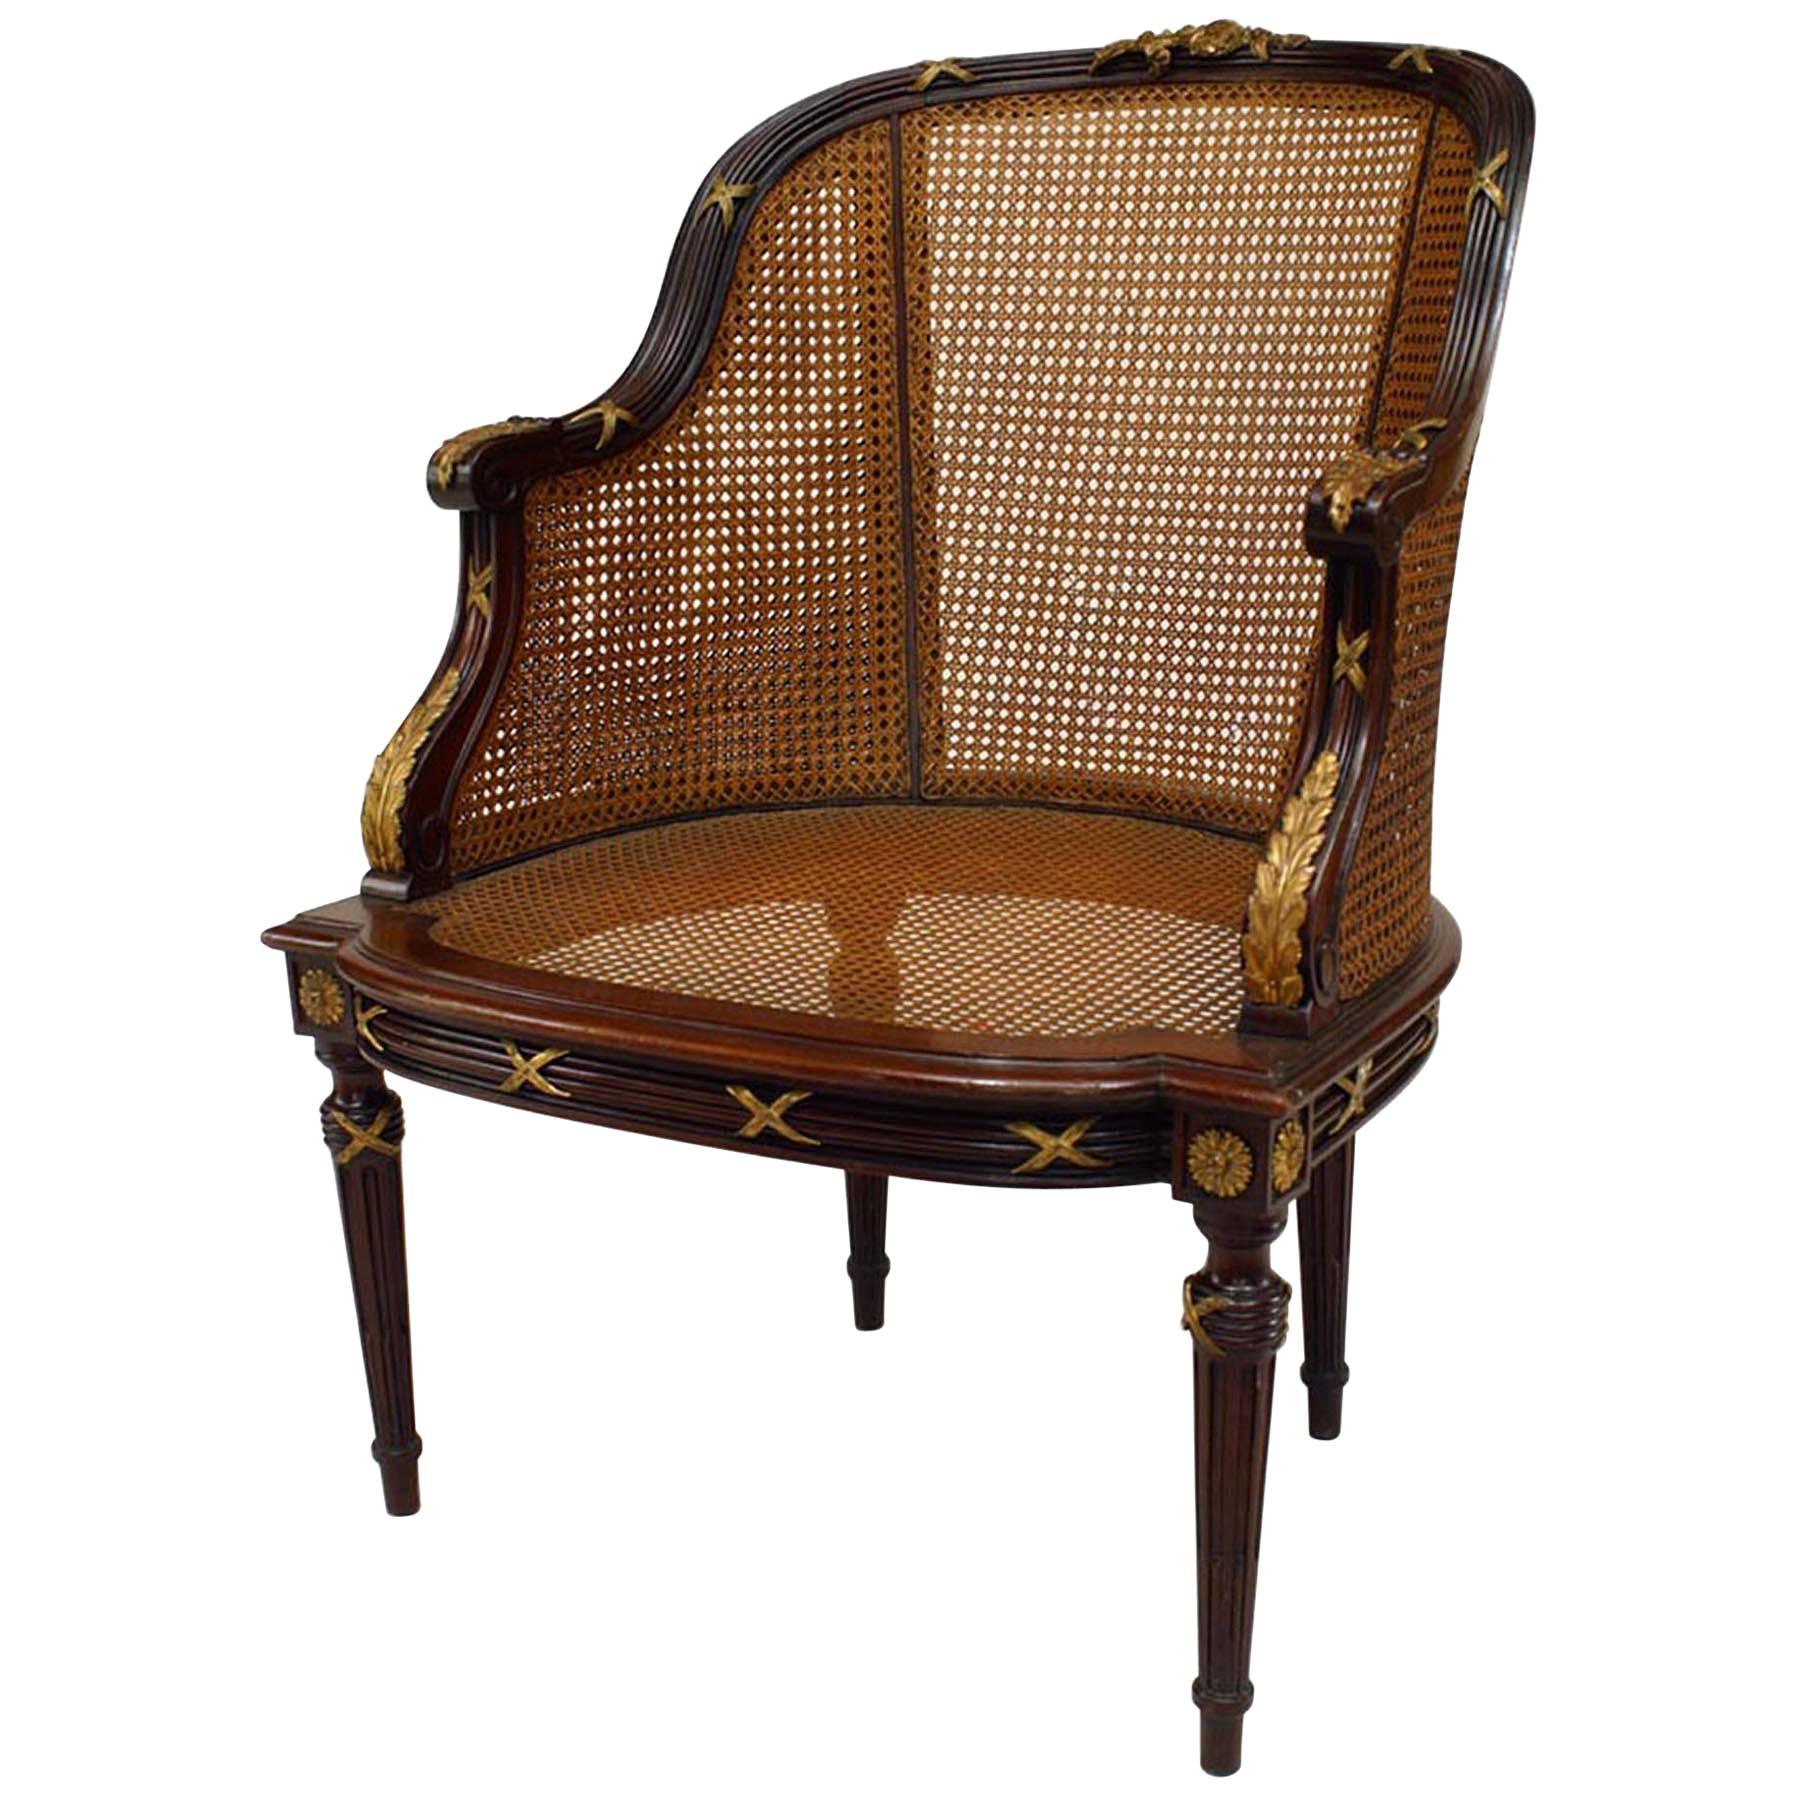 French Louis XVI Style Ormolu-Mounted Mahogany Caned Bergere